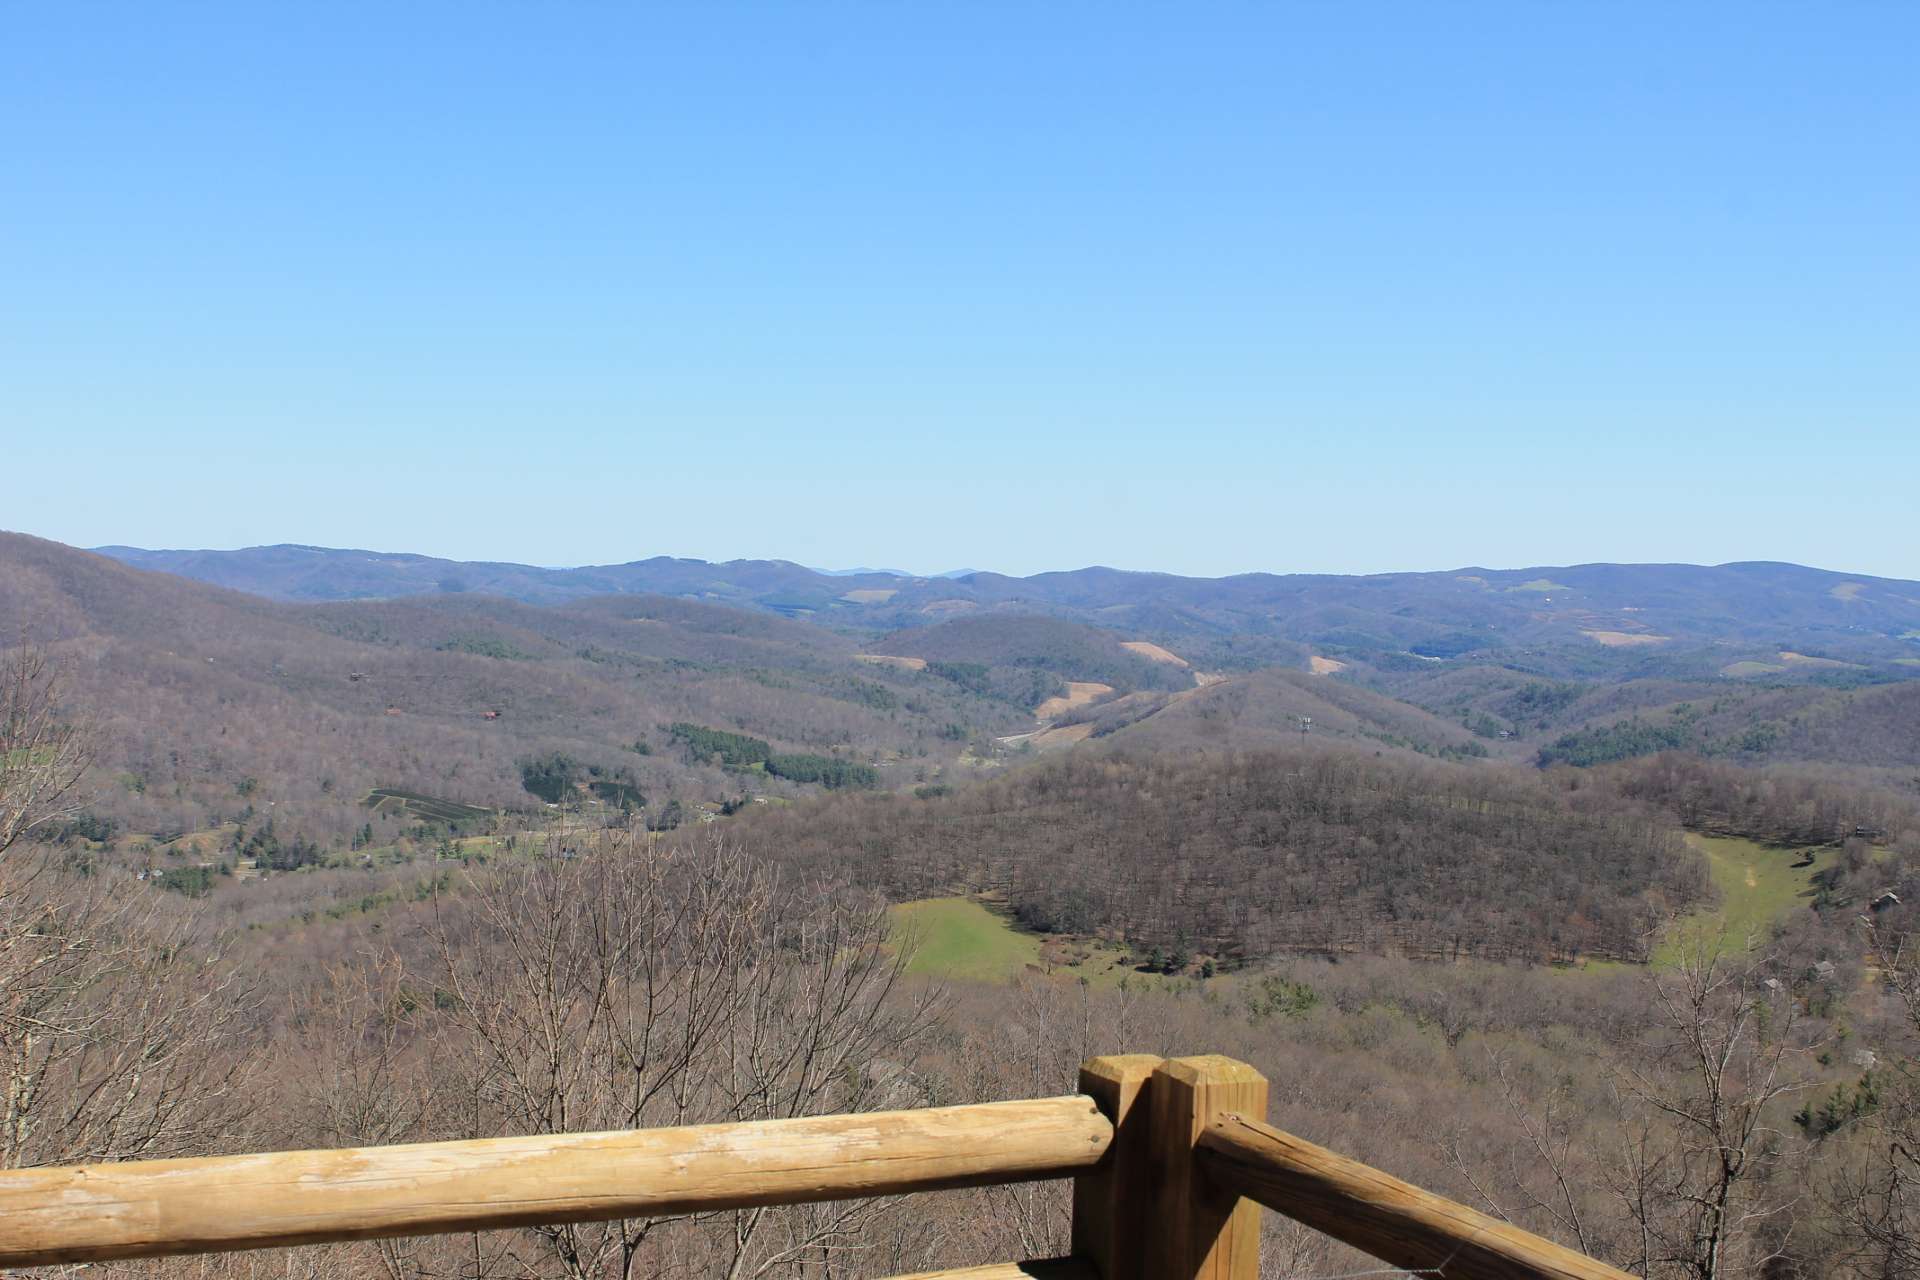 You will enjoy the stunning panoramic views of the Blue Ridge Mountains in the distance.